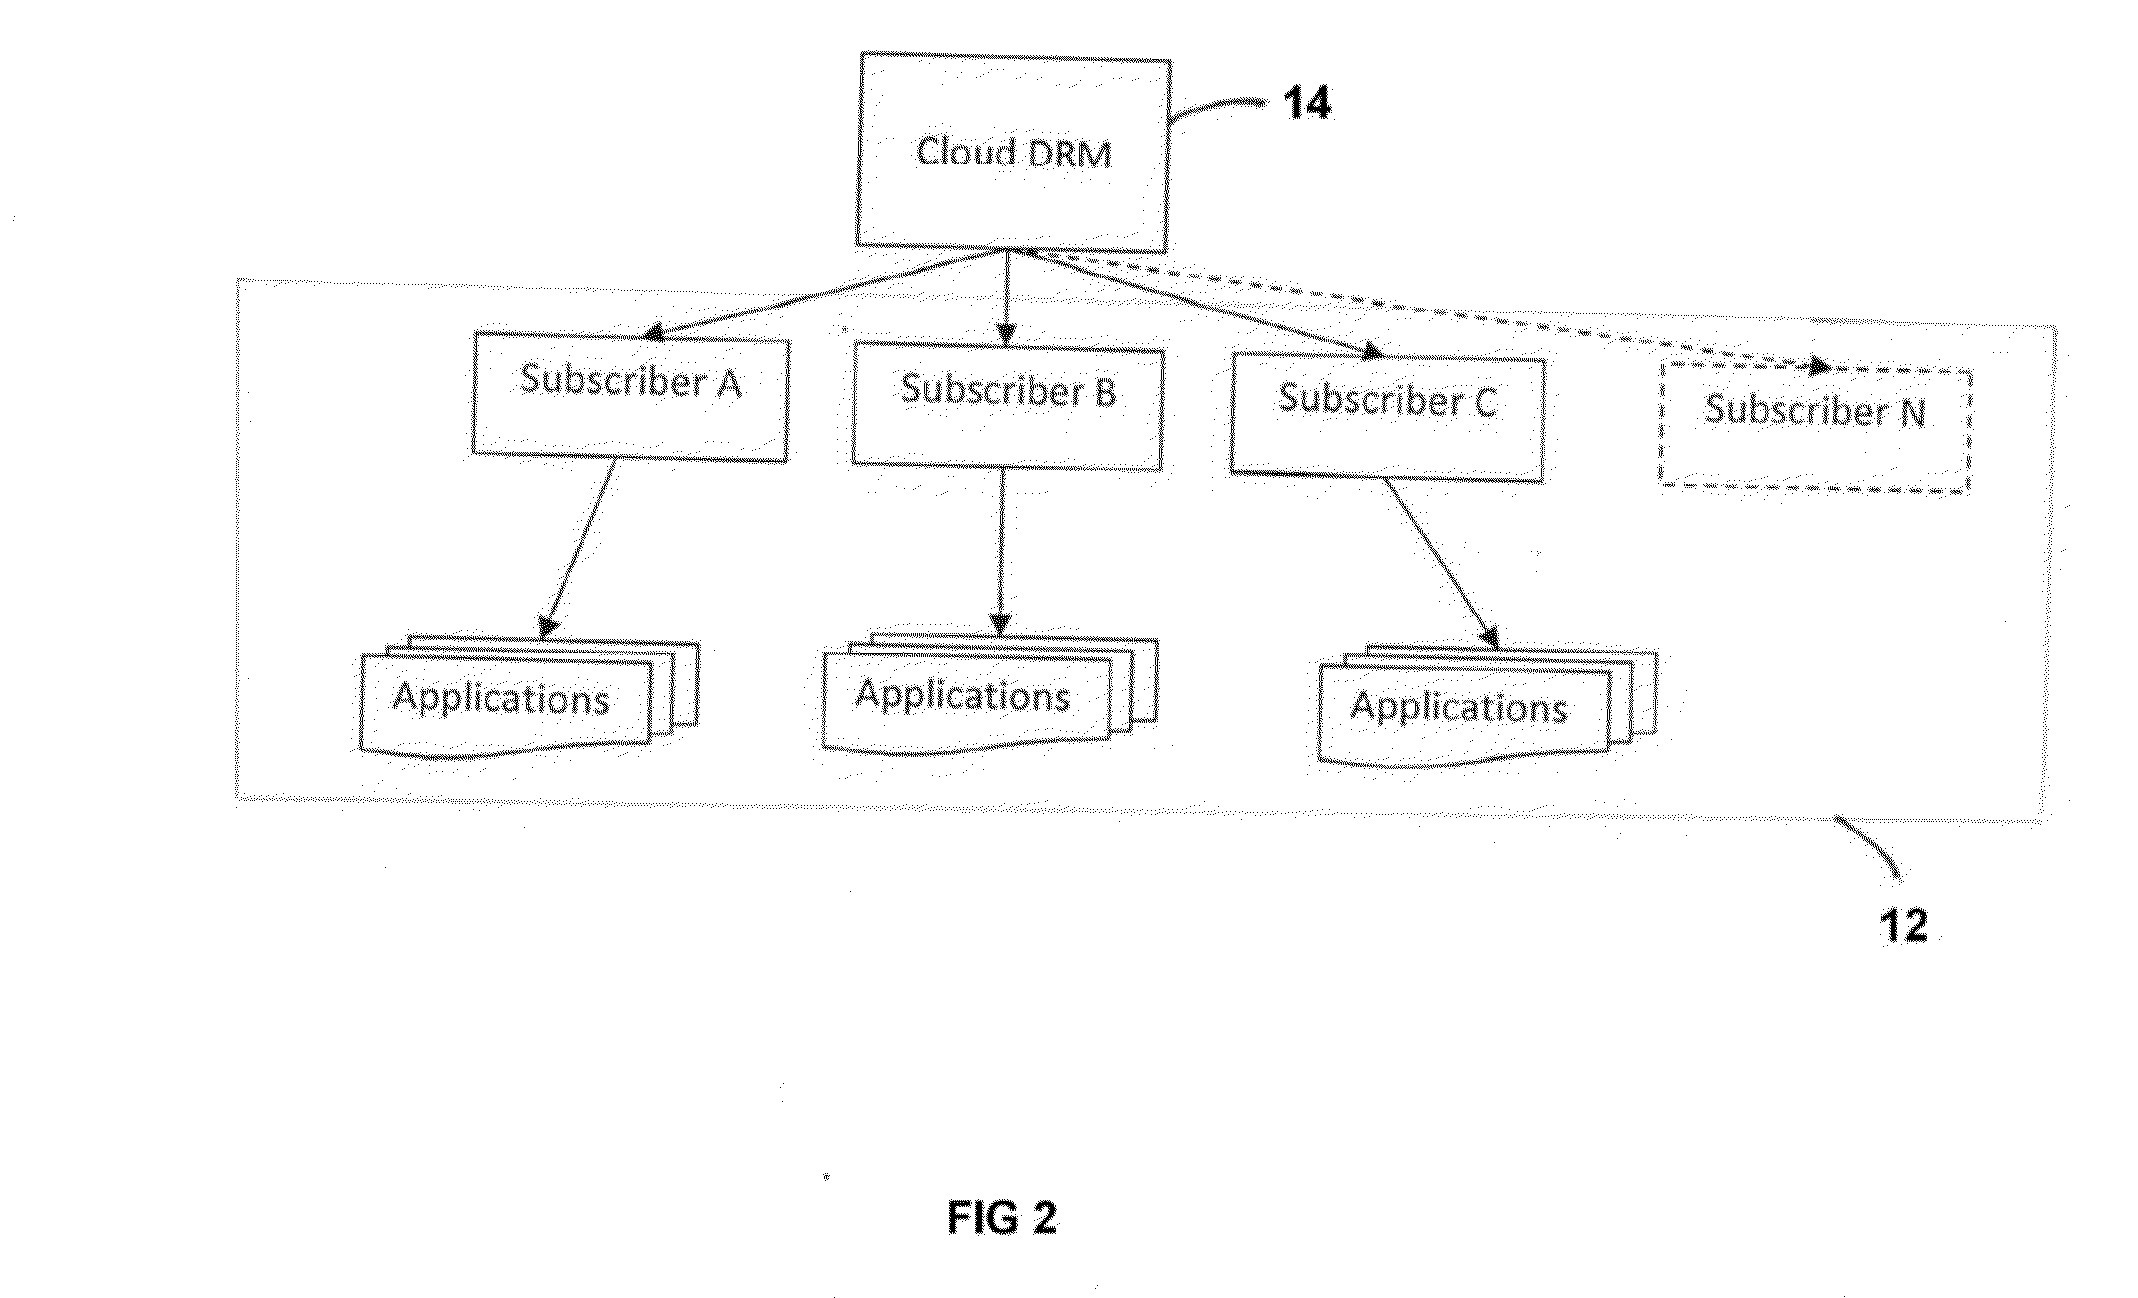 Multi-tenant disaster recovery management system and method for intelligently and optimally allocating computing resources between multiple subscribers